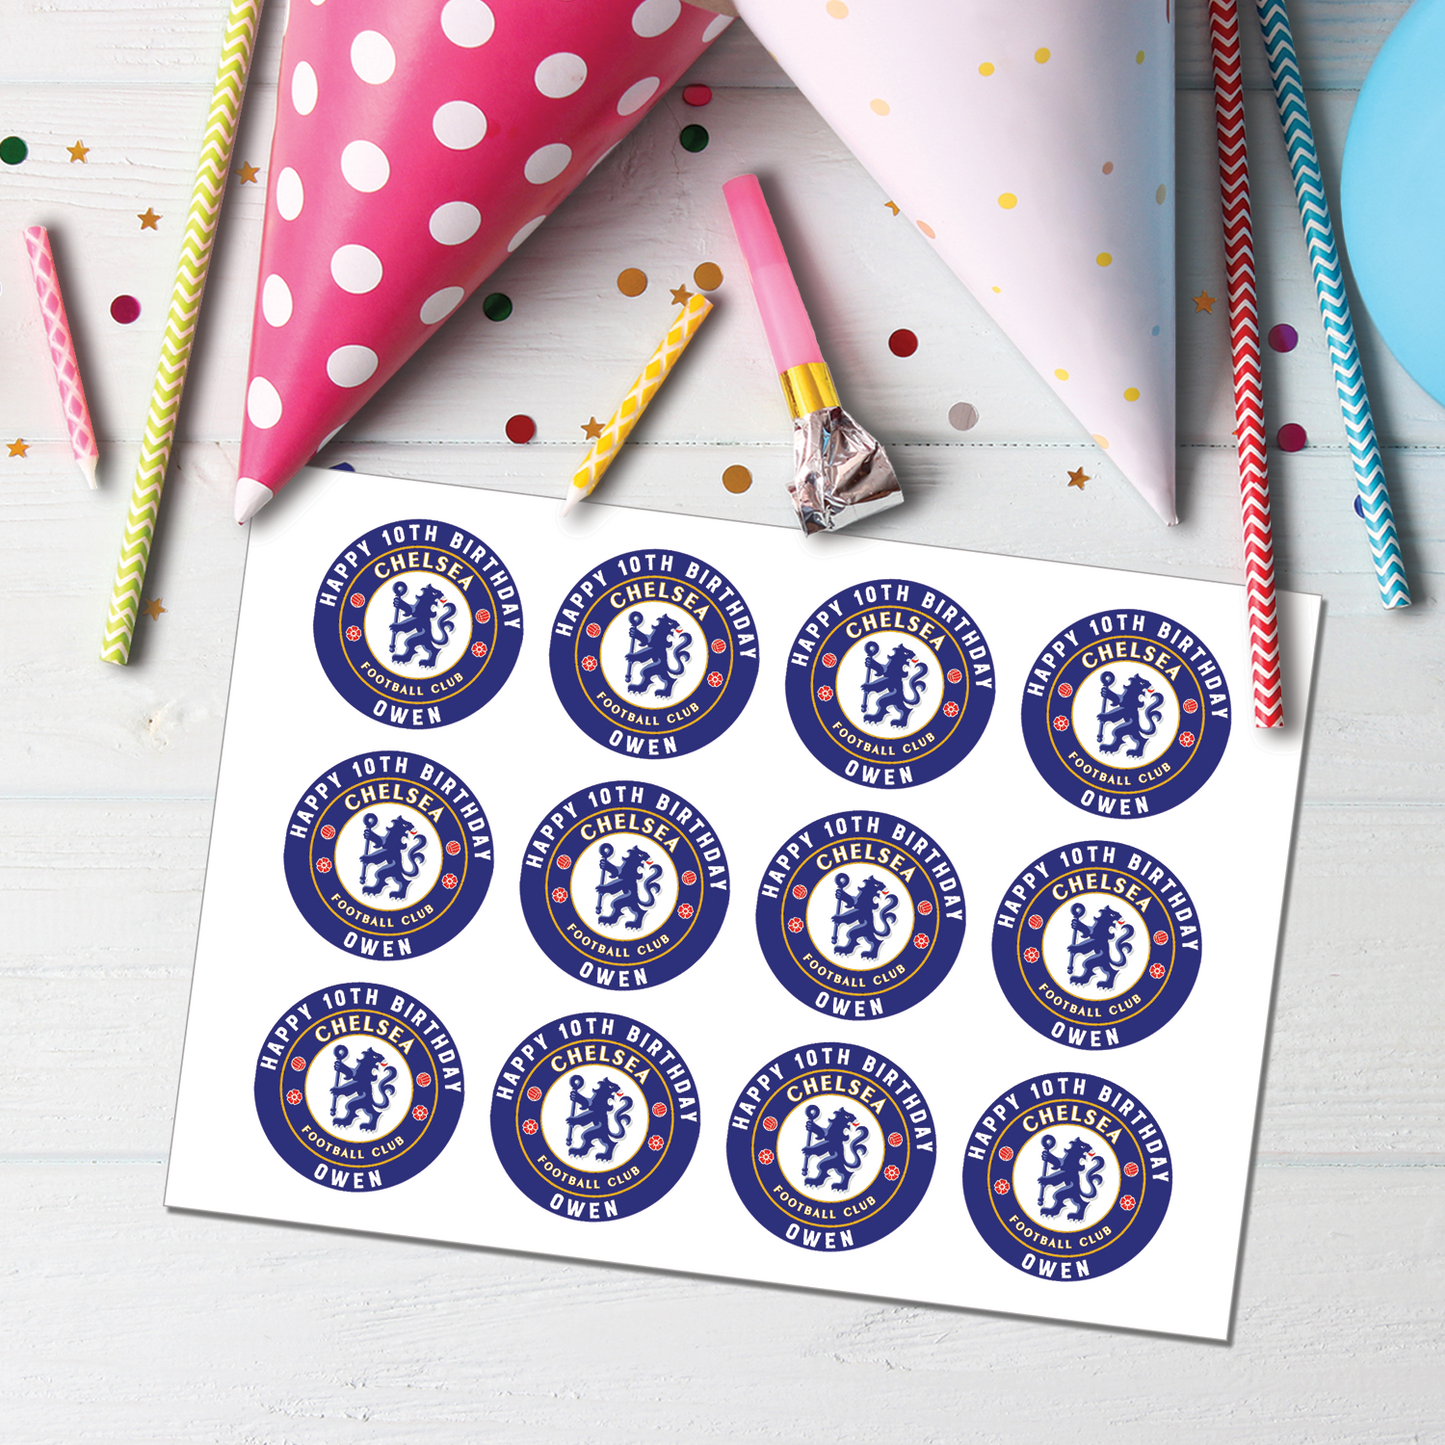 Chelsea FC Personalized Cupcakes Toppers - A Sweet Addition to Your Party